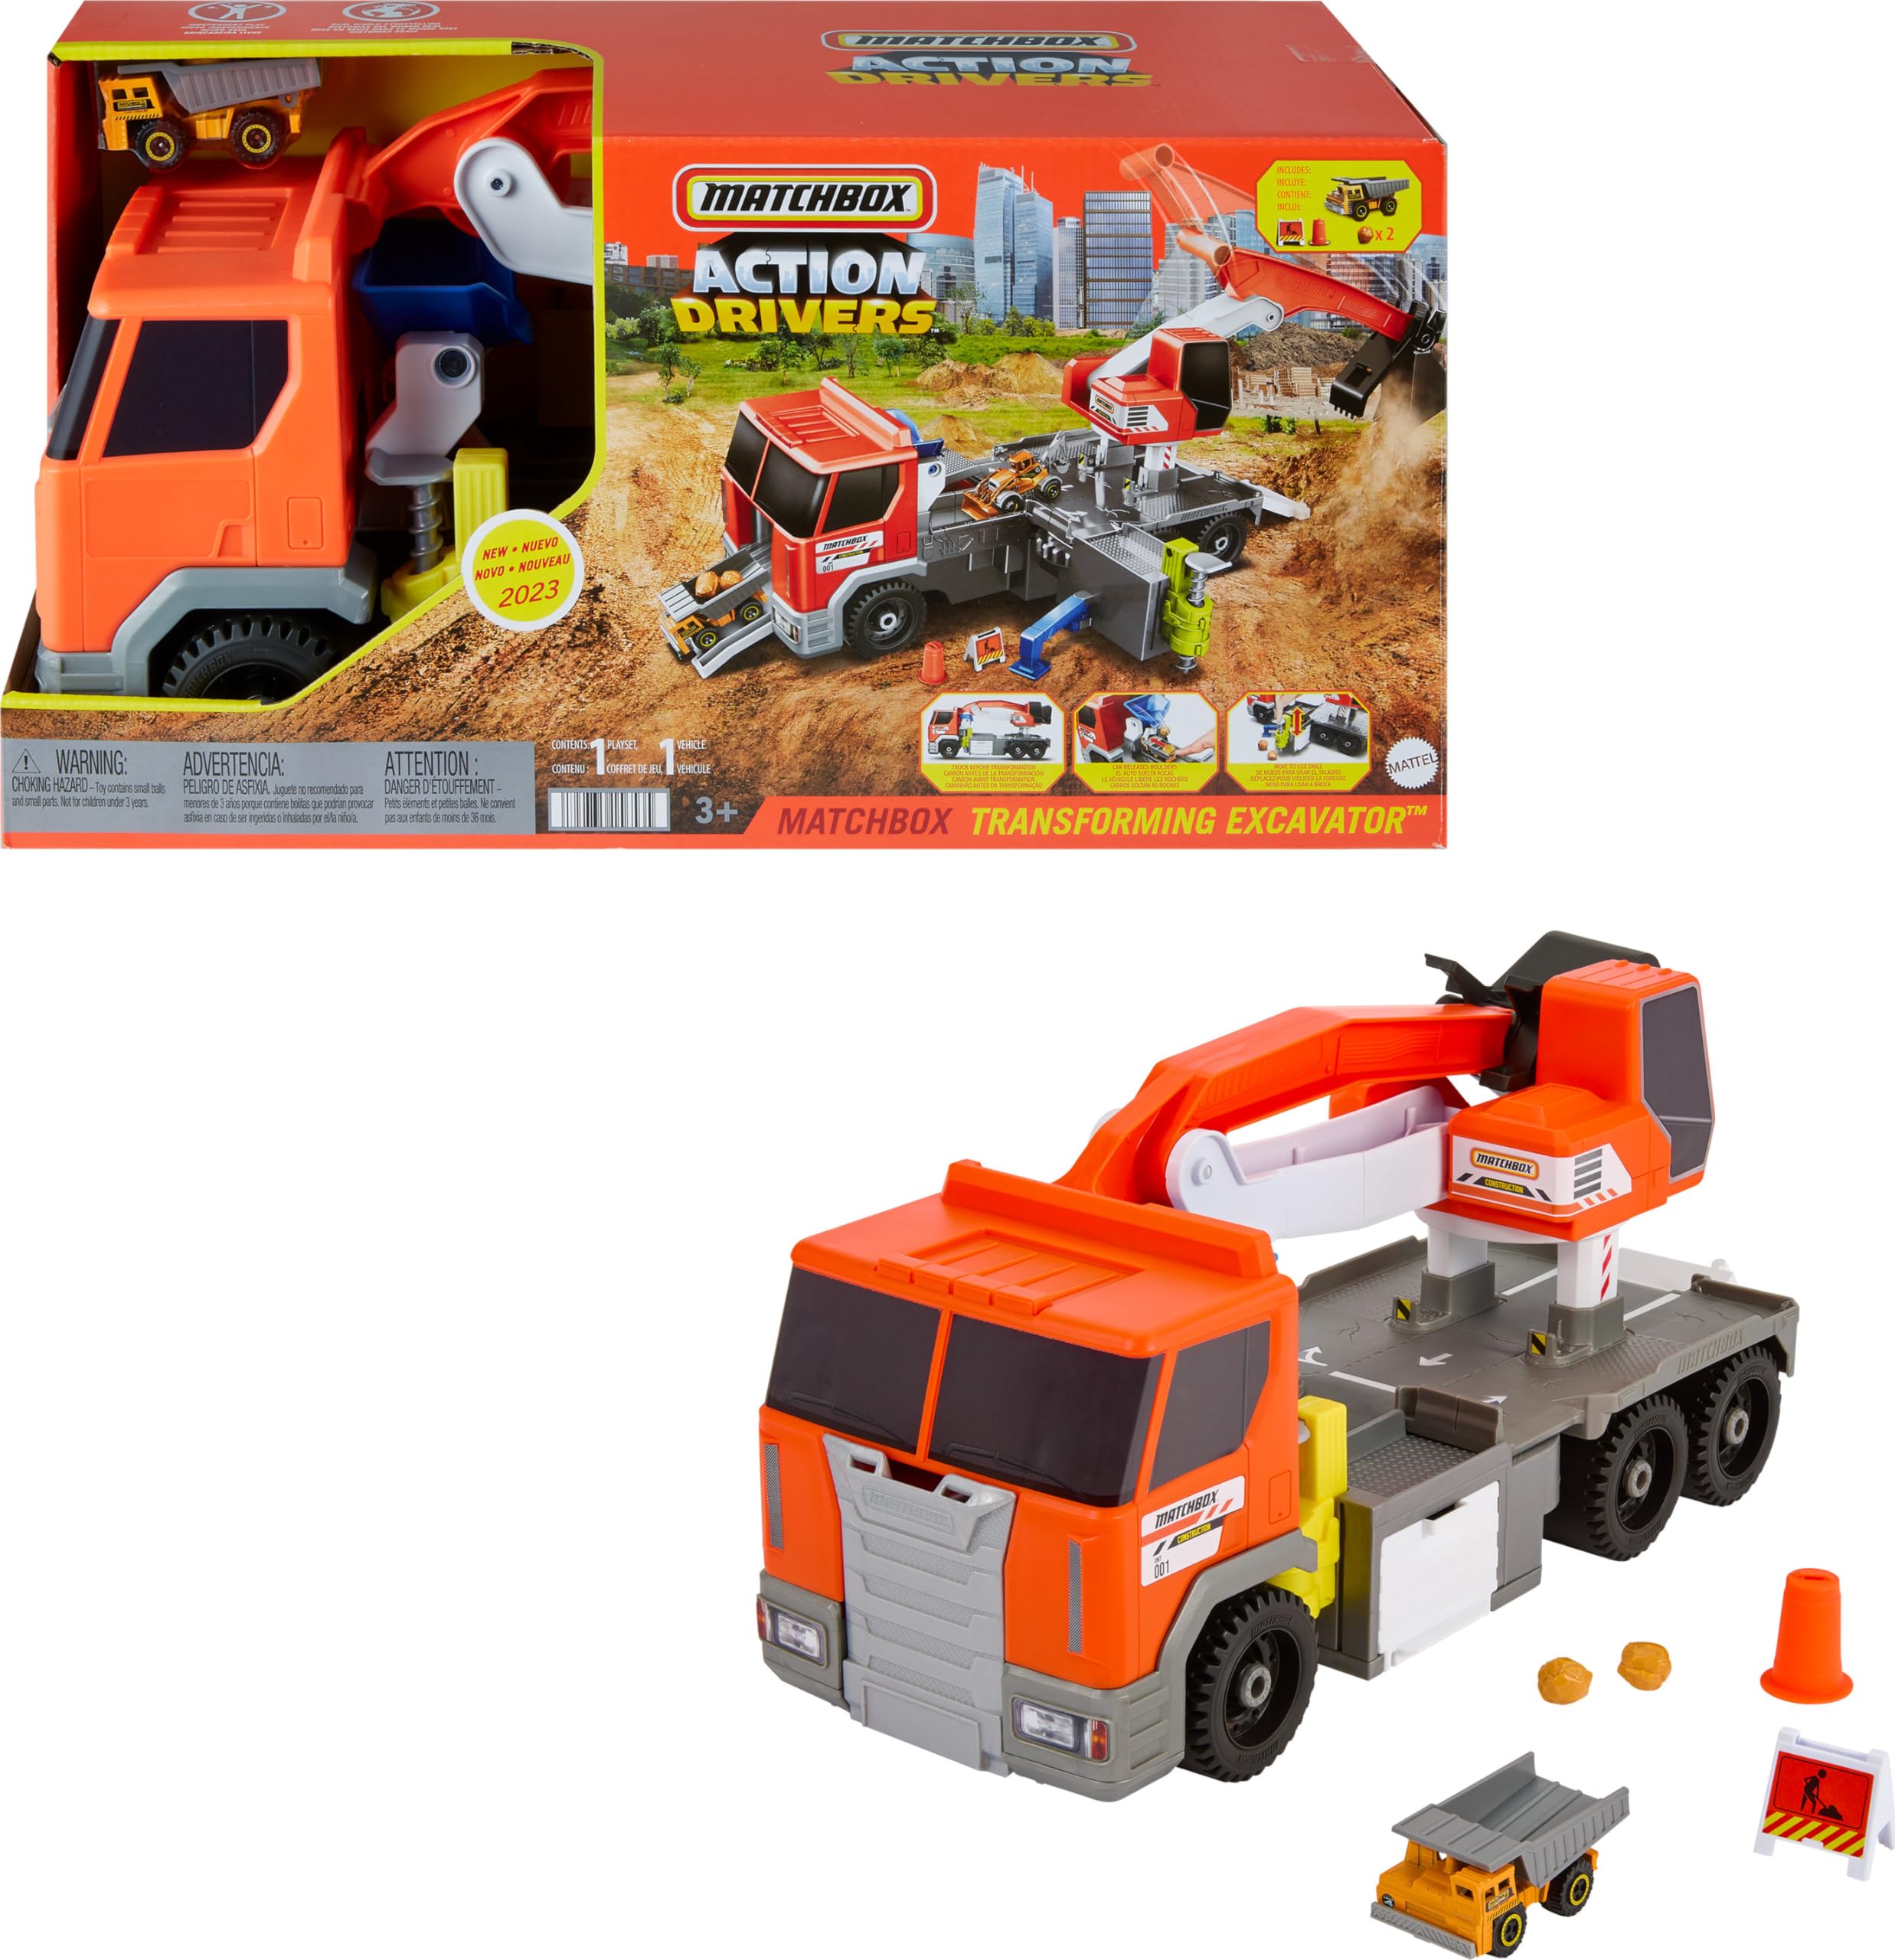 Matchbox Action Drivers Transforming Excavator 1:64 Scale Truck & Playset w/ 4 Themed Accessories $15.30 + Free Shipping w/ Prime or on $35+